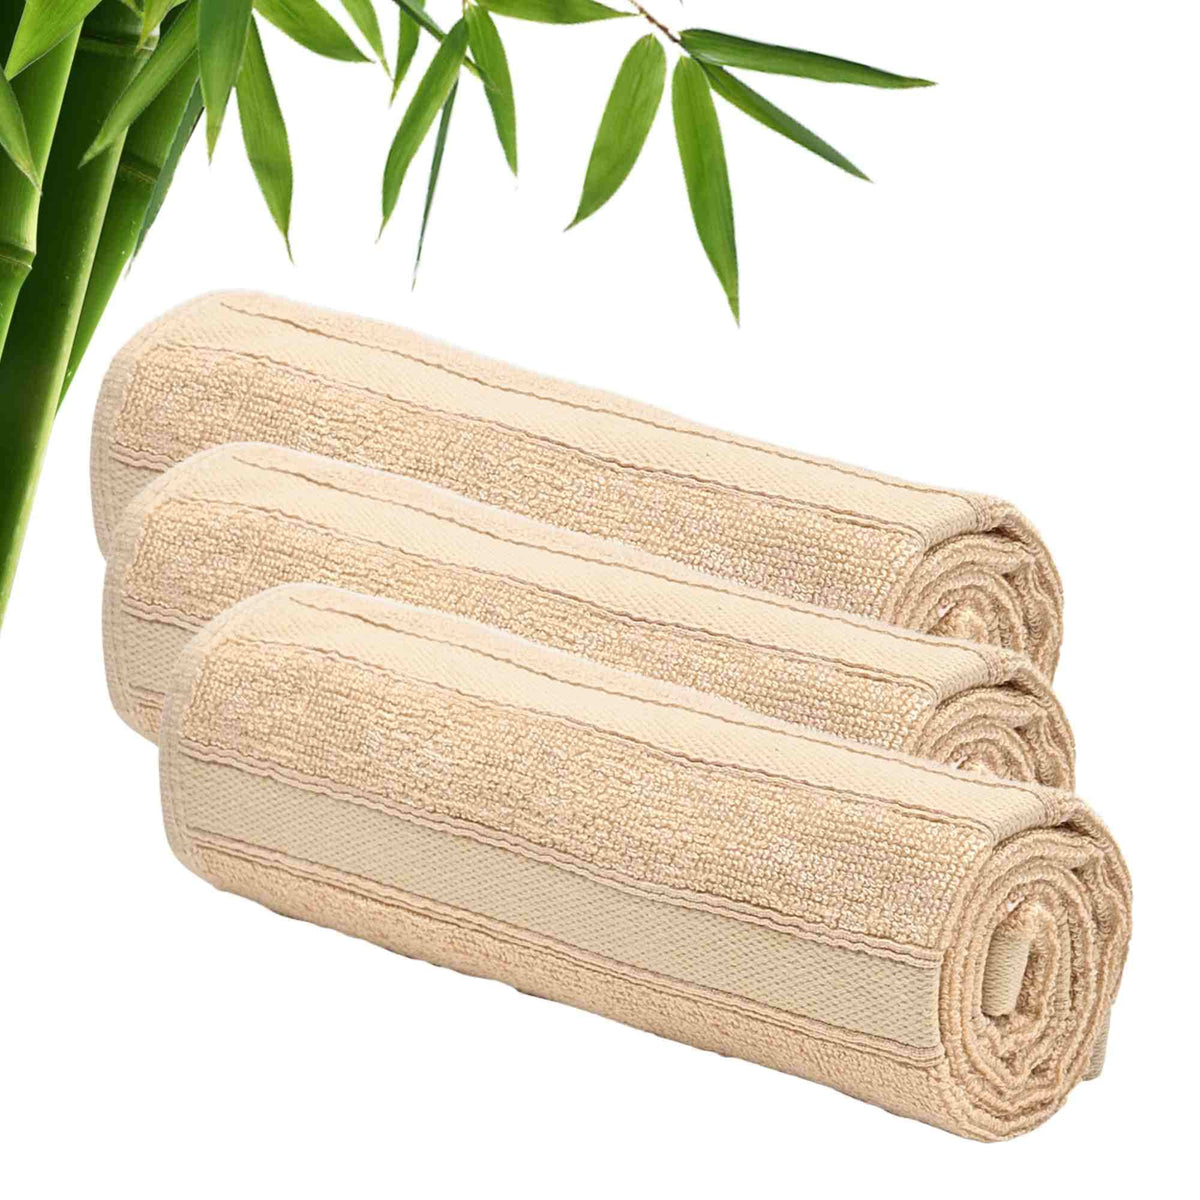 600GSM 100% Bamboo Hand Towel | Anti Odour & Anti Bacterial Bamboo Towel | Ultra Absorbent & Quick Drying Hand & Face Towel for Men & Women (Pack of 3, Beige)